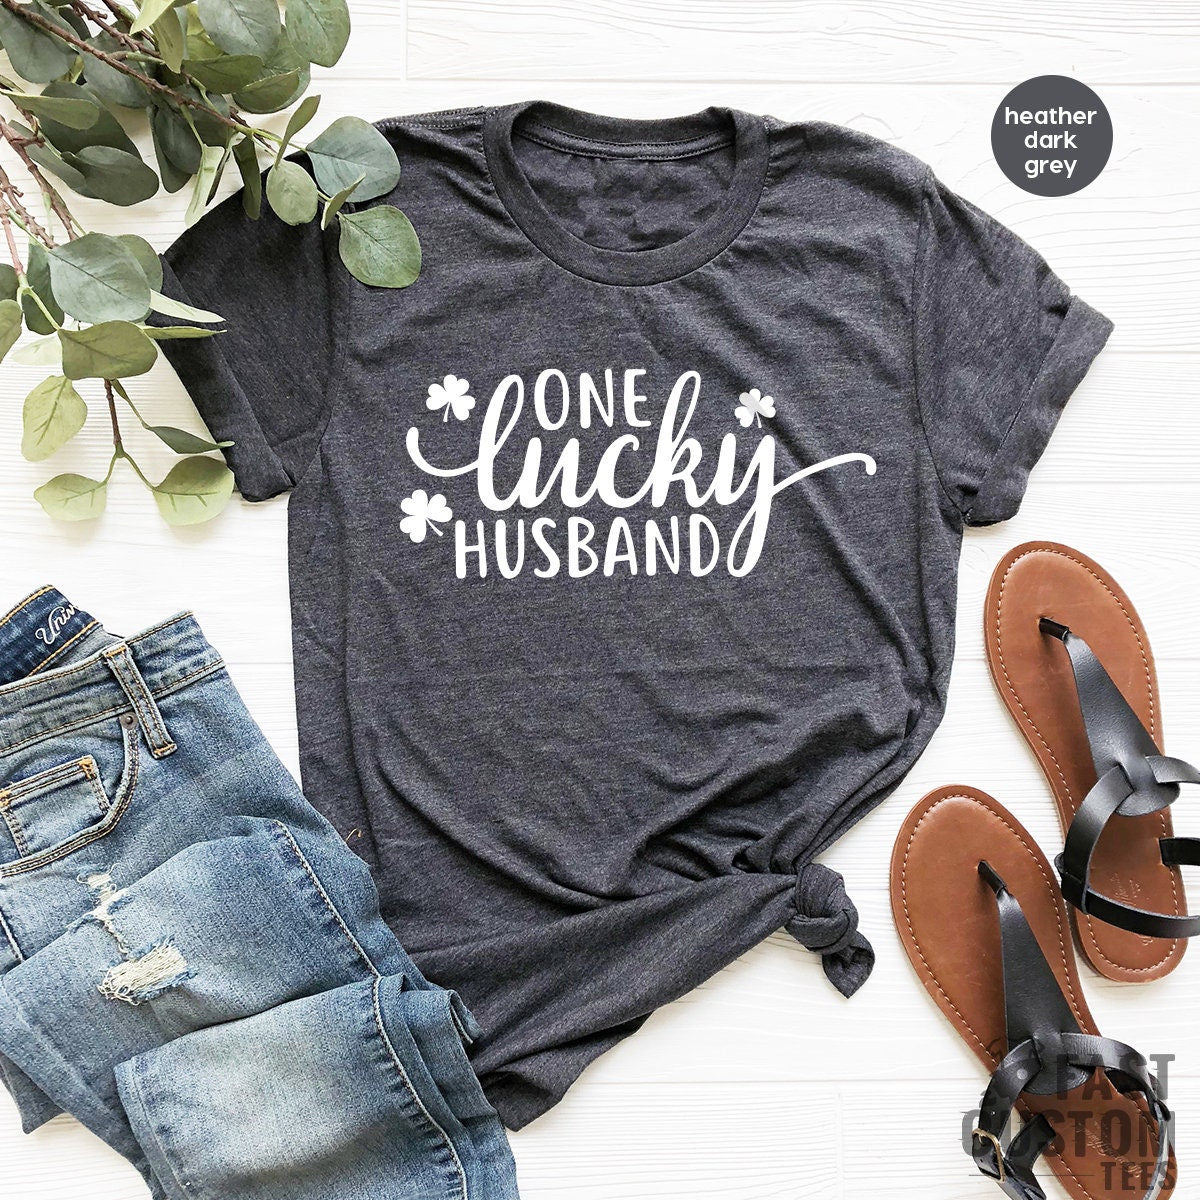 One Lucky Husband Shirt, Husband T Shirt, Gift From Wife, Husband Gifts, Father's Day Shirt, Valentine's Day Shirt, Best Husband TShirt - Fastdeliverytees.com